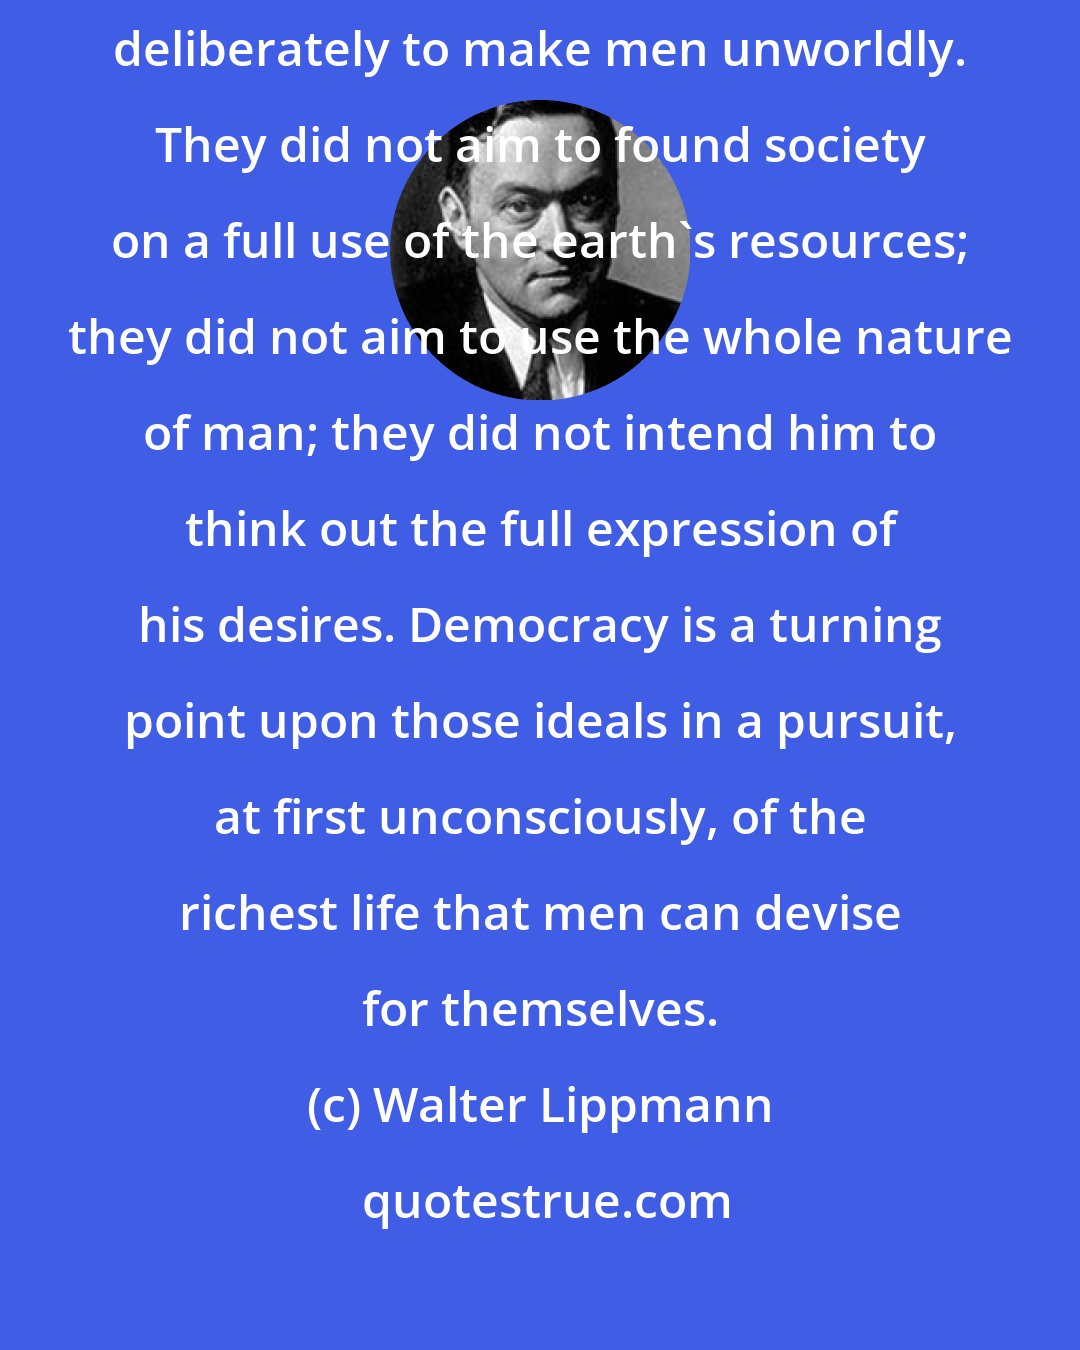 Walter Lippmann: The modern world is reversing the old virtues of authority. They aimed deliberately to make men unworldly. They did not aim to found society on a full use of the earth's resources; they did not aim to use the whole nature of man; they did not intend him to think out the full expression of his desires. Democracy is a turning point upon those ideals in a pursuit, at first unconsciously, of the richest life that men can devise for themselves.